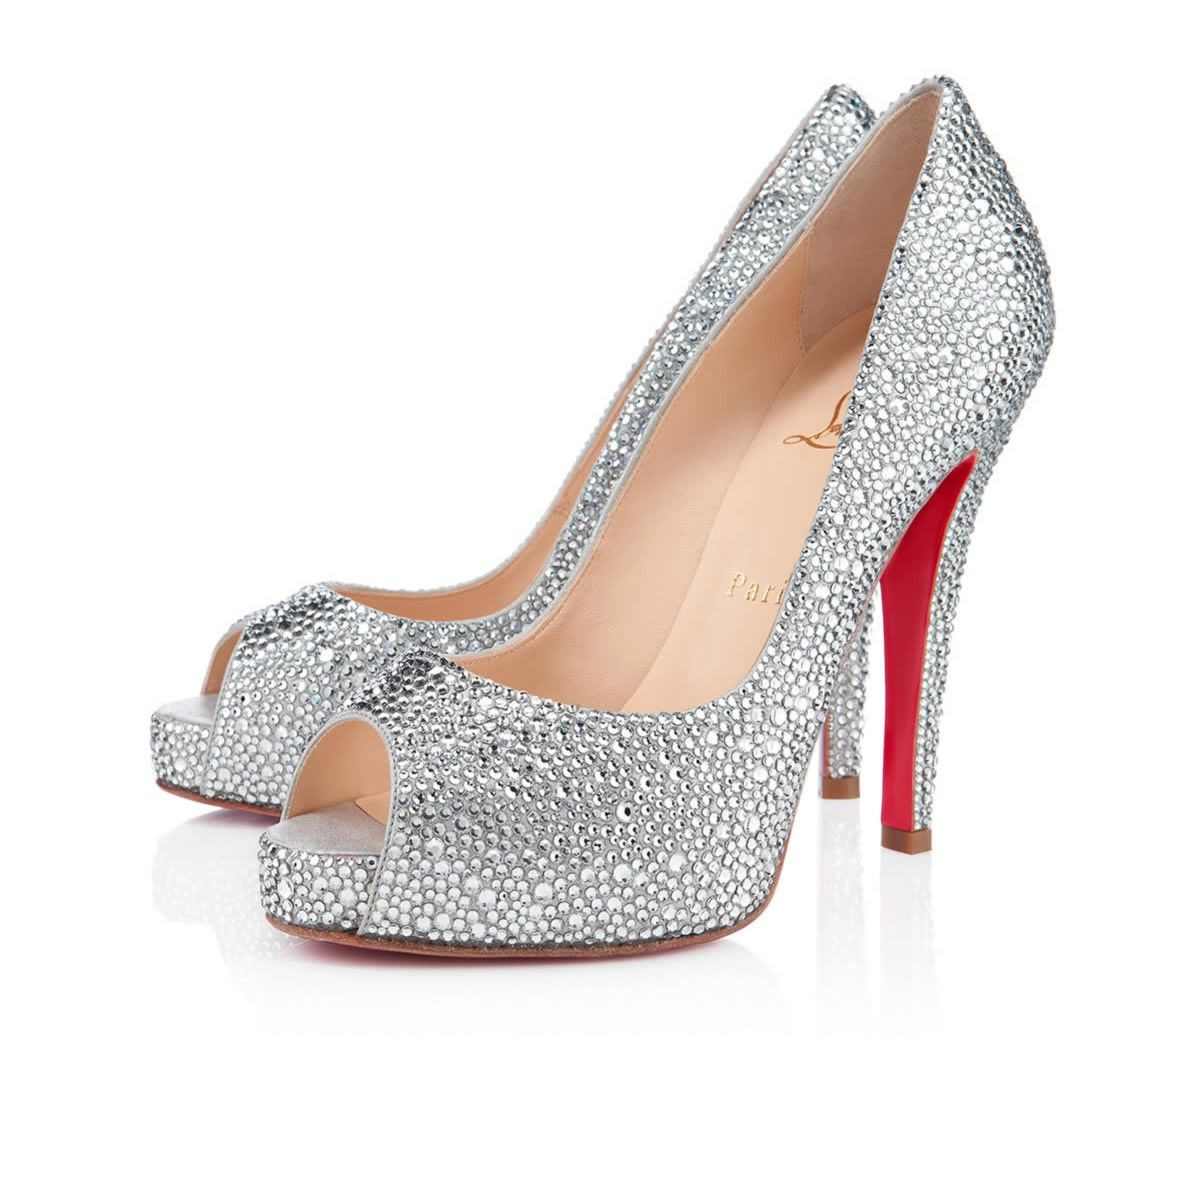 Wedding Shoes Louboutin
 The 2013 Christian Louboutin Bridal Collection